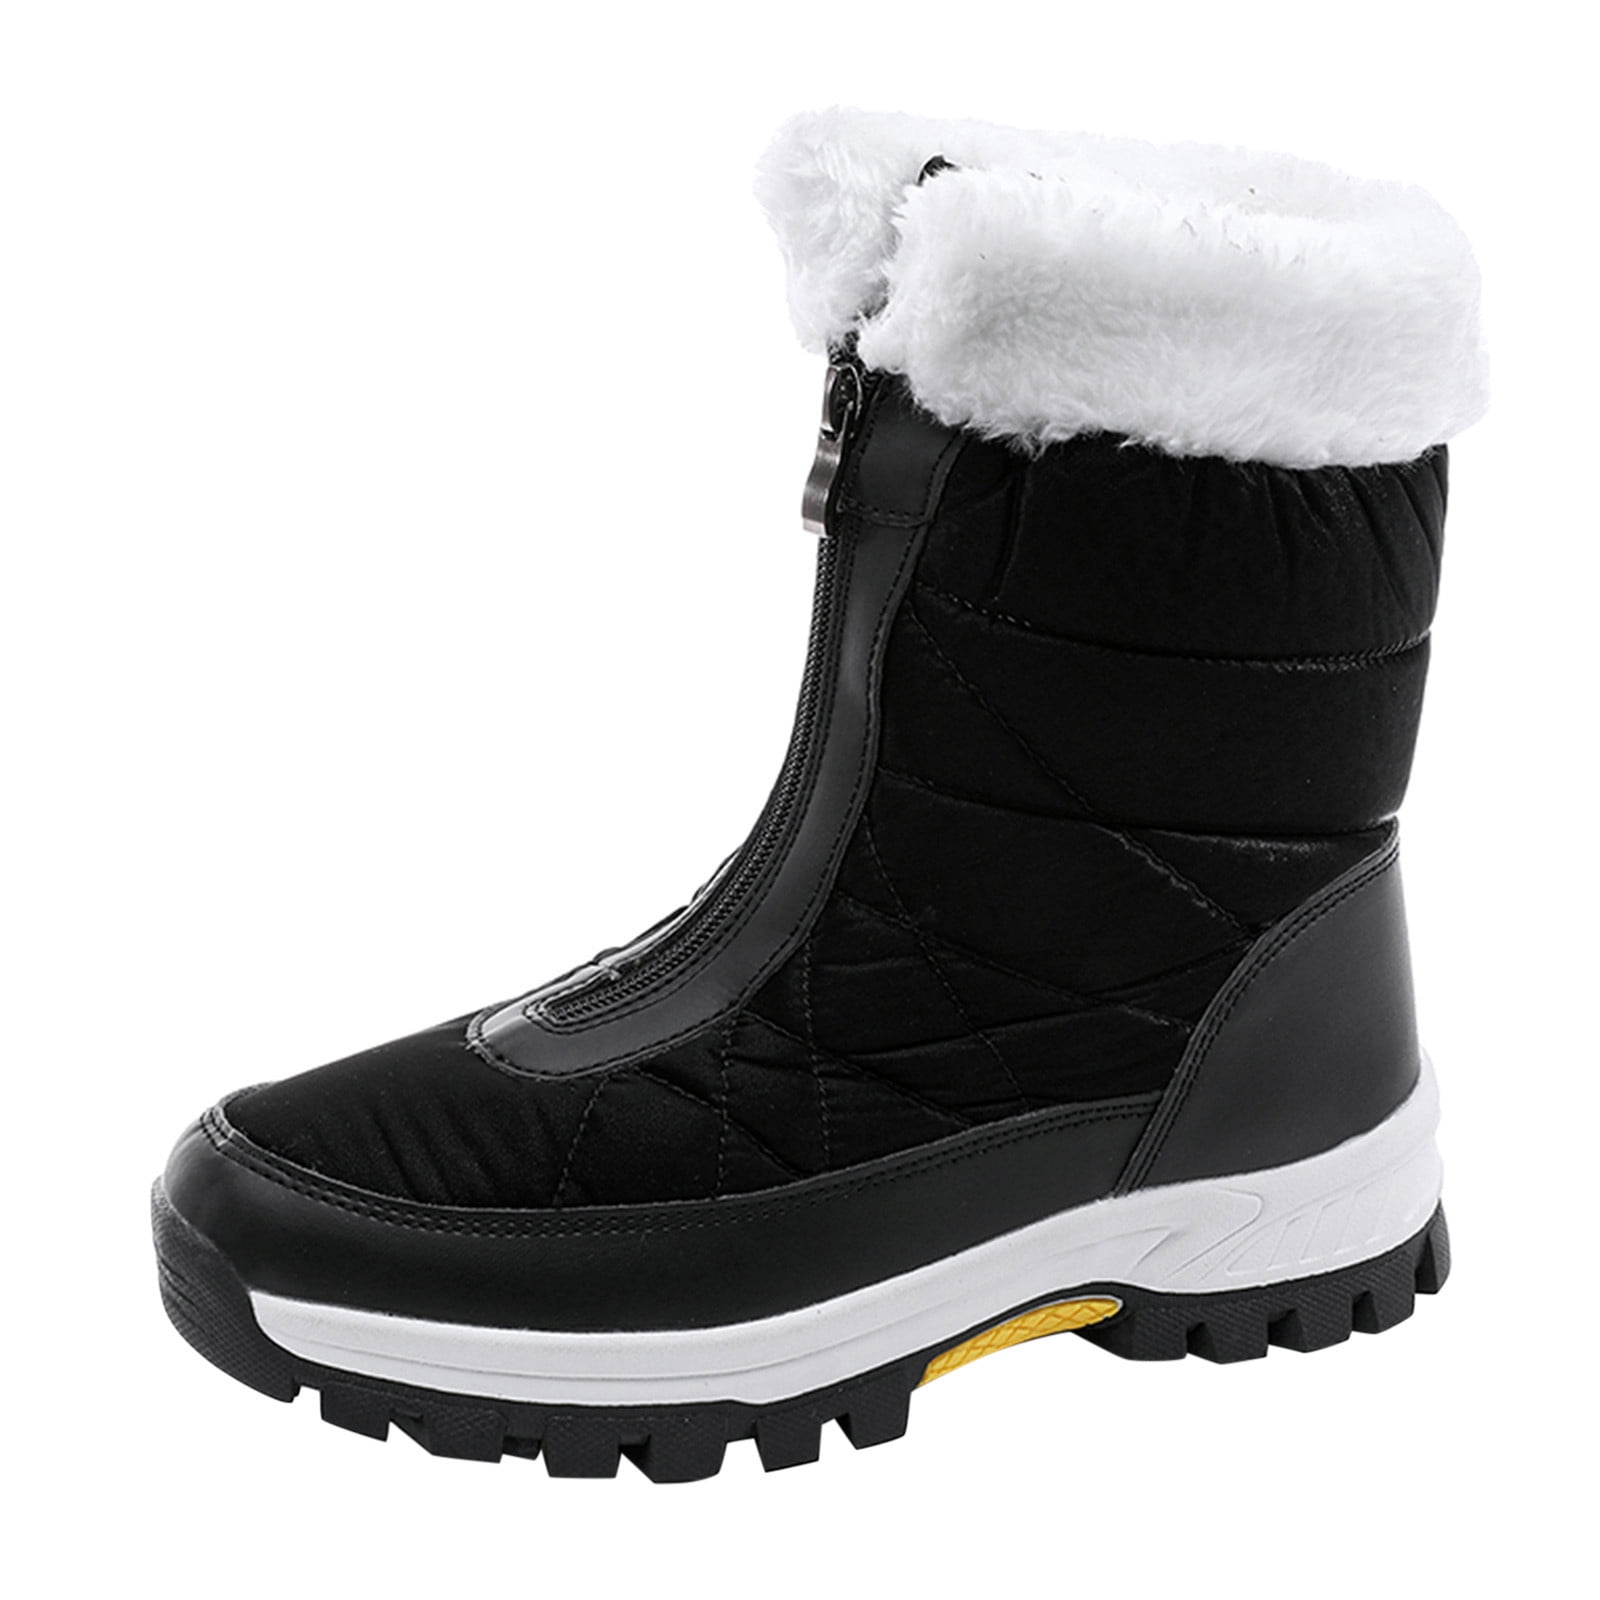 dmqupv Boot for Snow and Ice Women Proof Flat Zipper Keep Warm Snow ...